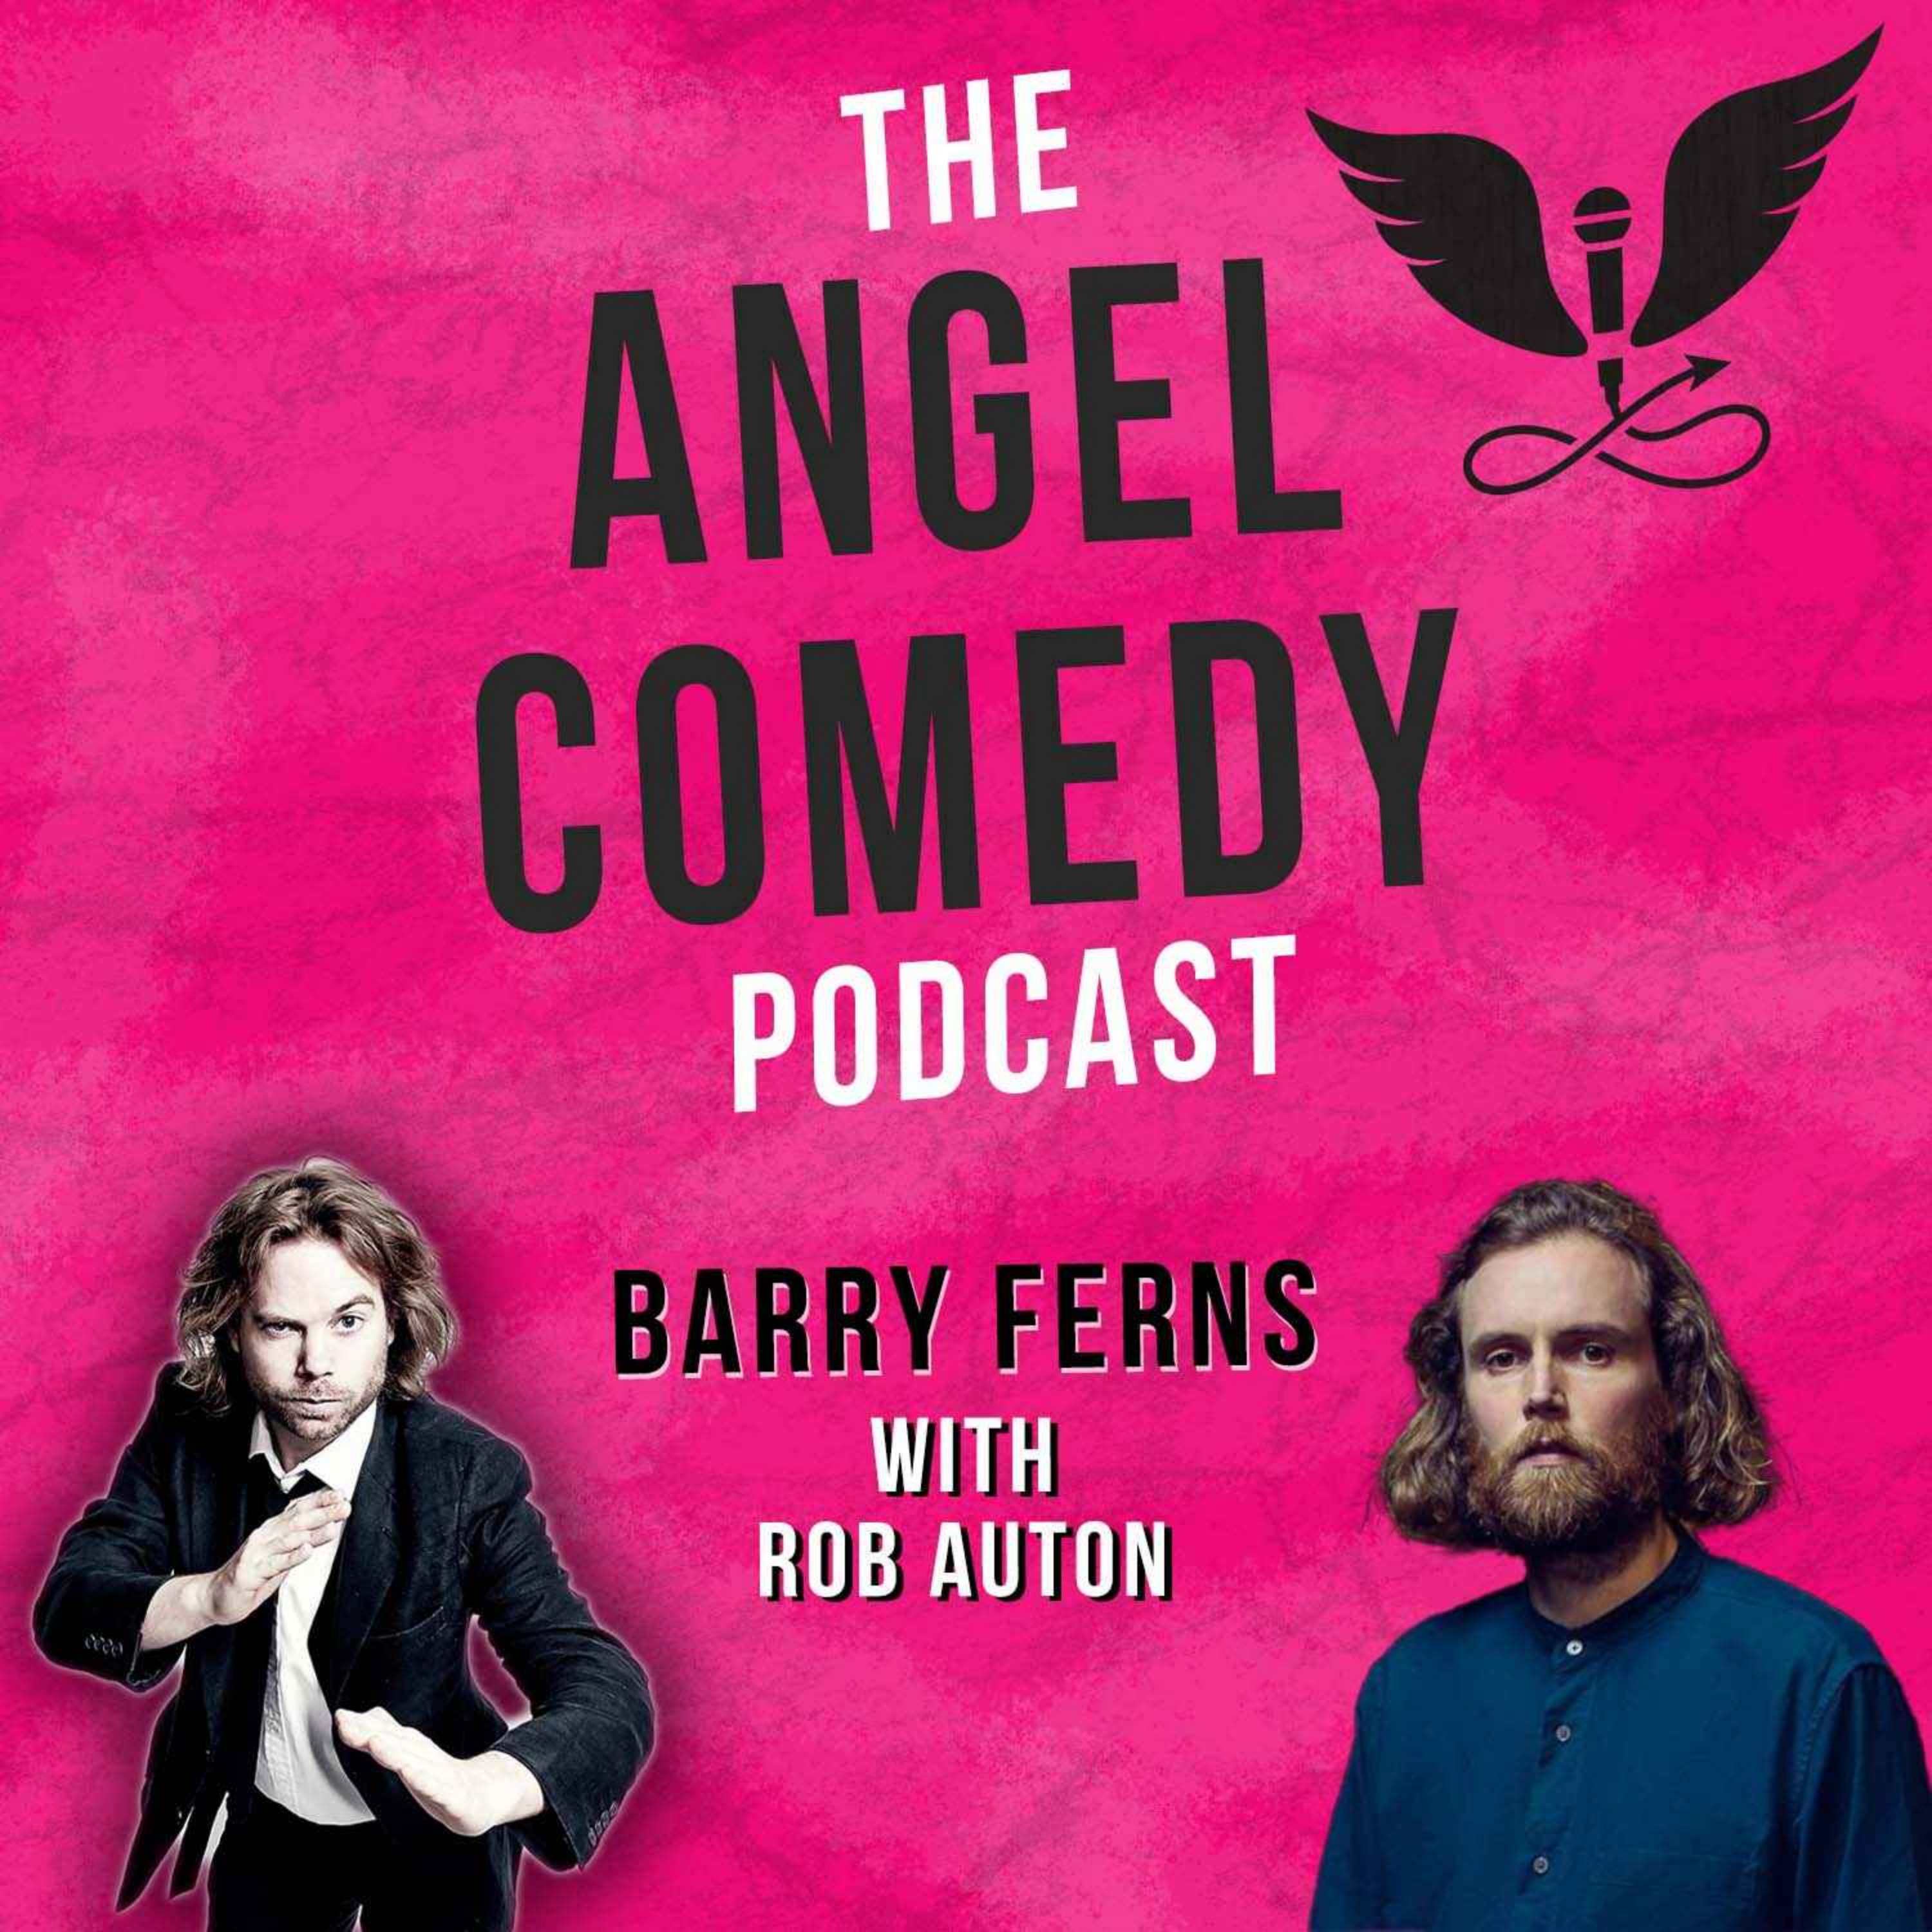 Podcast: The Angel Comedy Podcast with Rob Auton - Angel Comedy